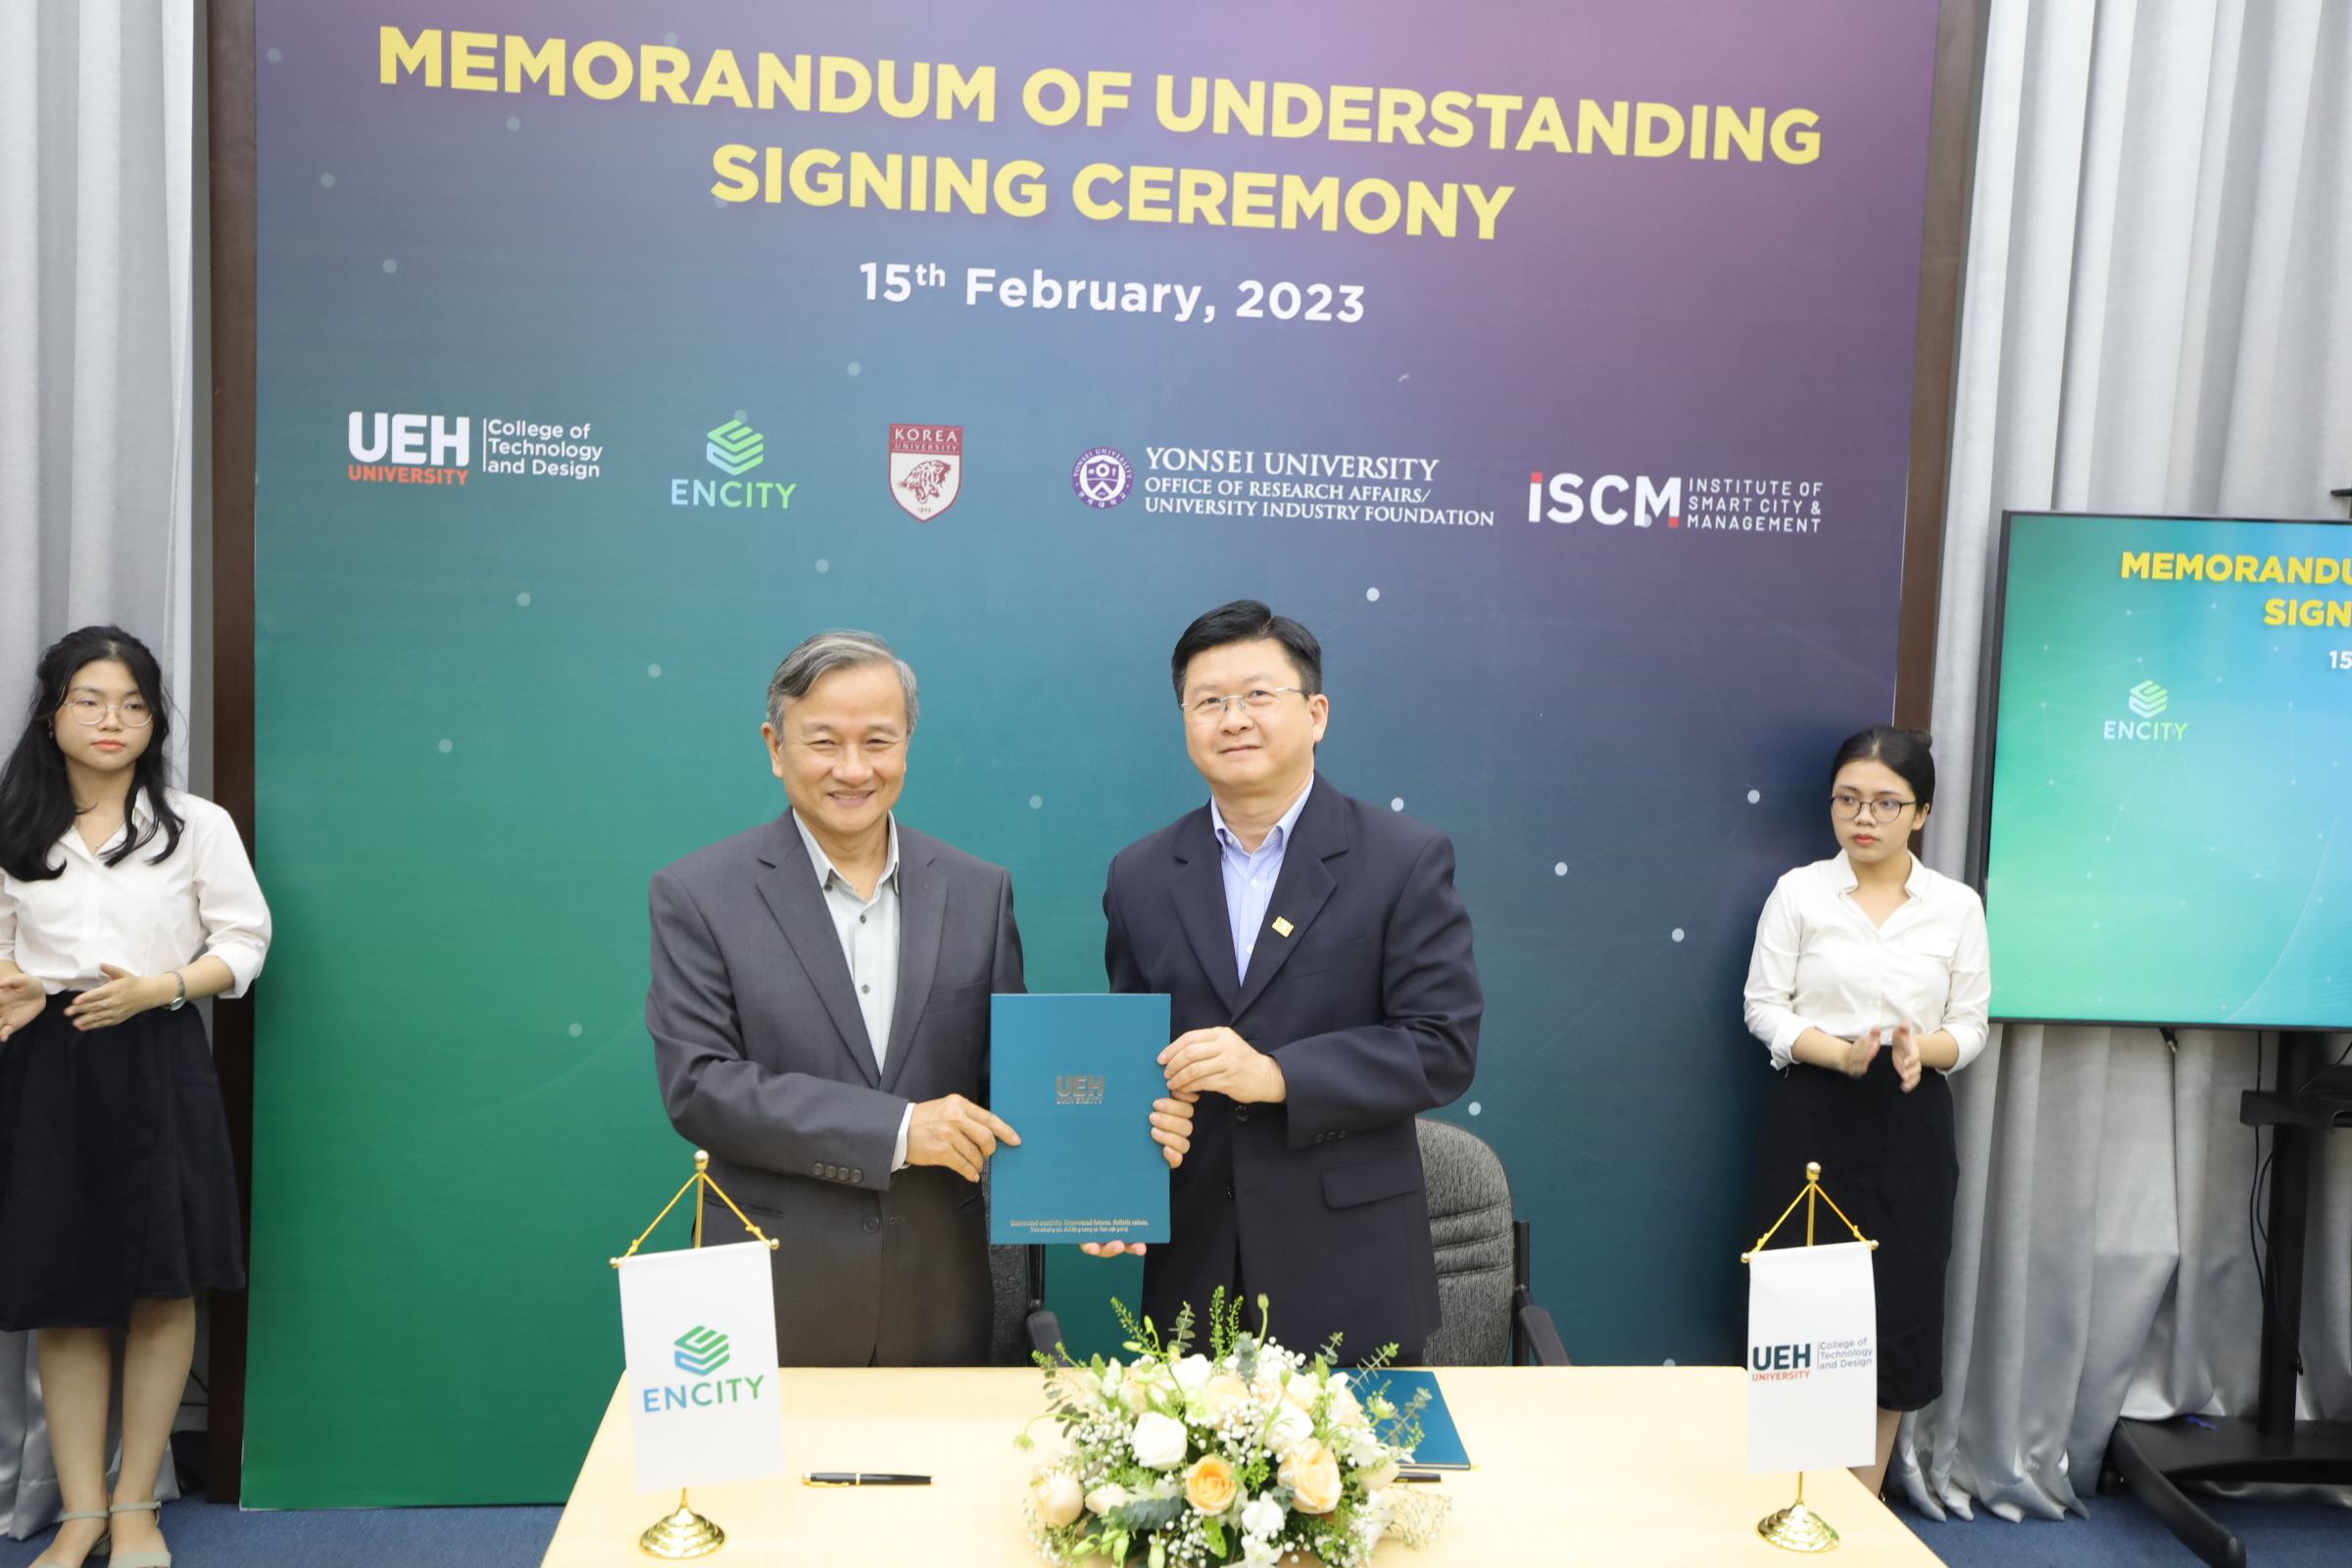 MEMORANDUM OF UNDERSTANDING SIGN CEREMONY BETWEEN UEH COLLEGE OF TECHNOLOGY AND DESIGN AND ENCITY INTERNATIONAL CONSULTING JOINT STOCK COMPANY; INSTITUTE OF SMART CITY AND MANAGEMENT (ISCM) AND UNIVERSITY-INDUSTRY FOUNDATION, YONSEI UNIVERSITY; ISCM AND INSTITUTE OF ECONOMIC RESEARCH - KOREA UNIVERSITY